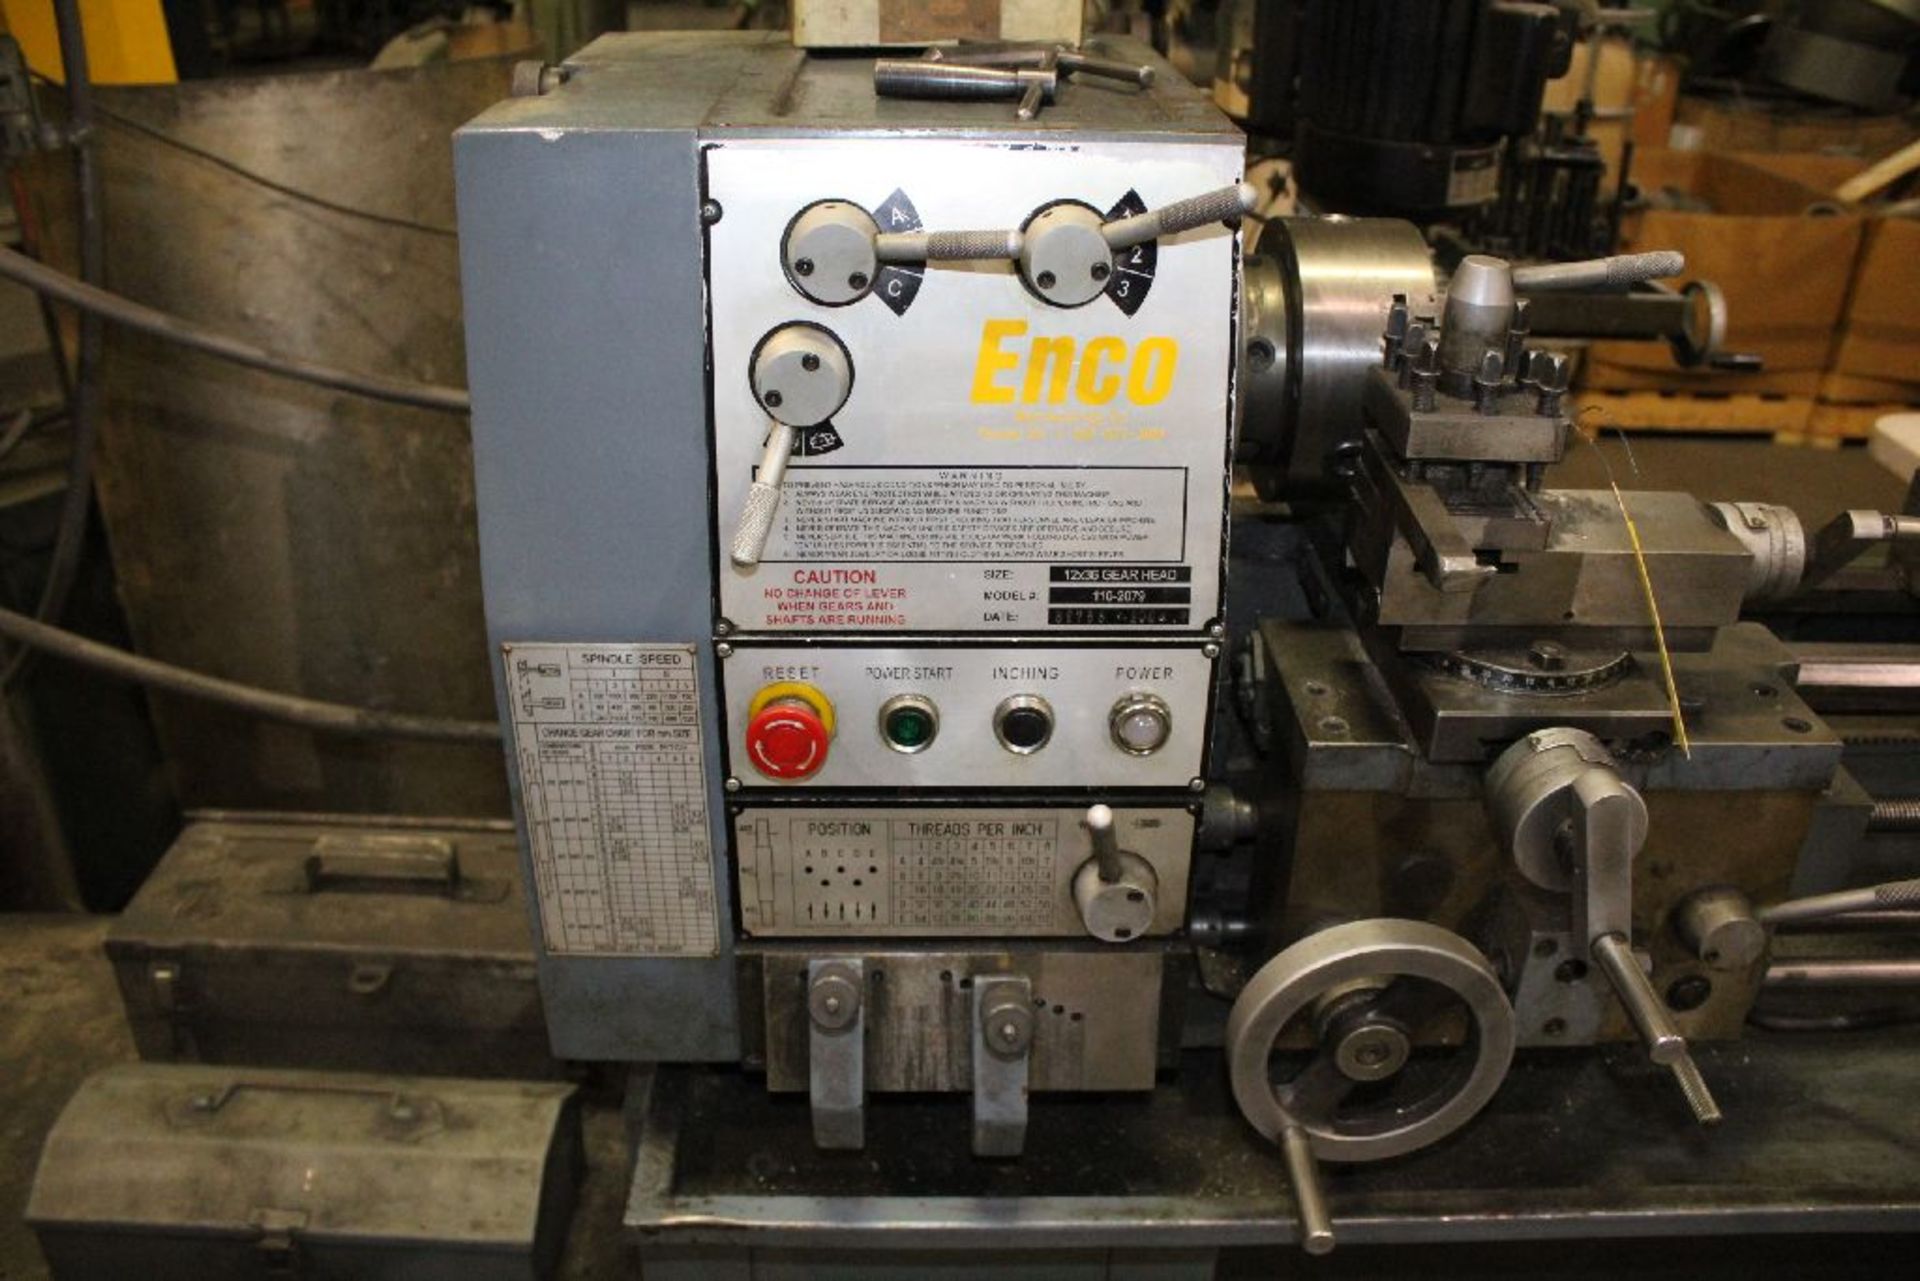 ENCO 12”X36” MODEL 110-2079 TOOLROOM LATHE, S/N 3273620048, 1550 RPM SPINDLE, INCH THREADING, 6” - Image 2 of 6